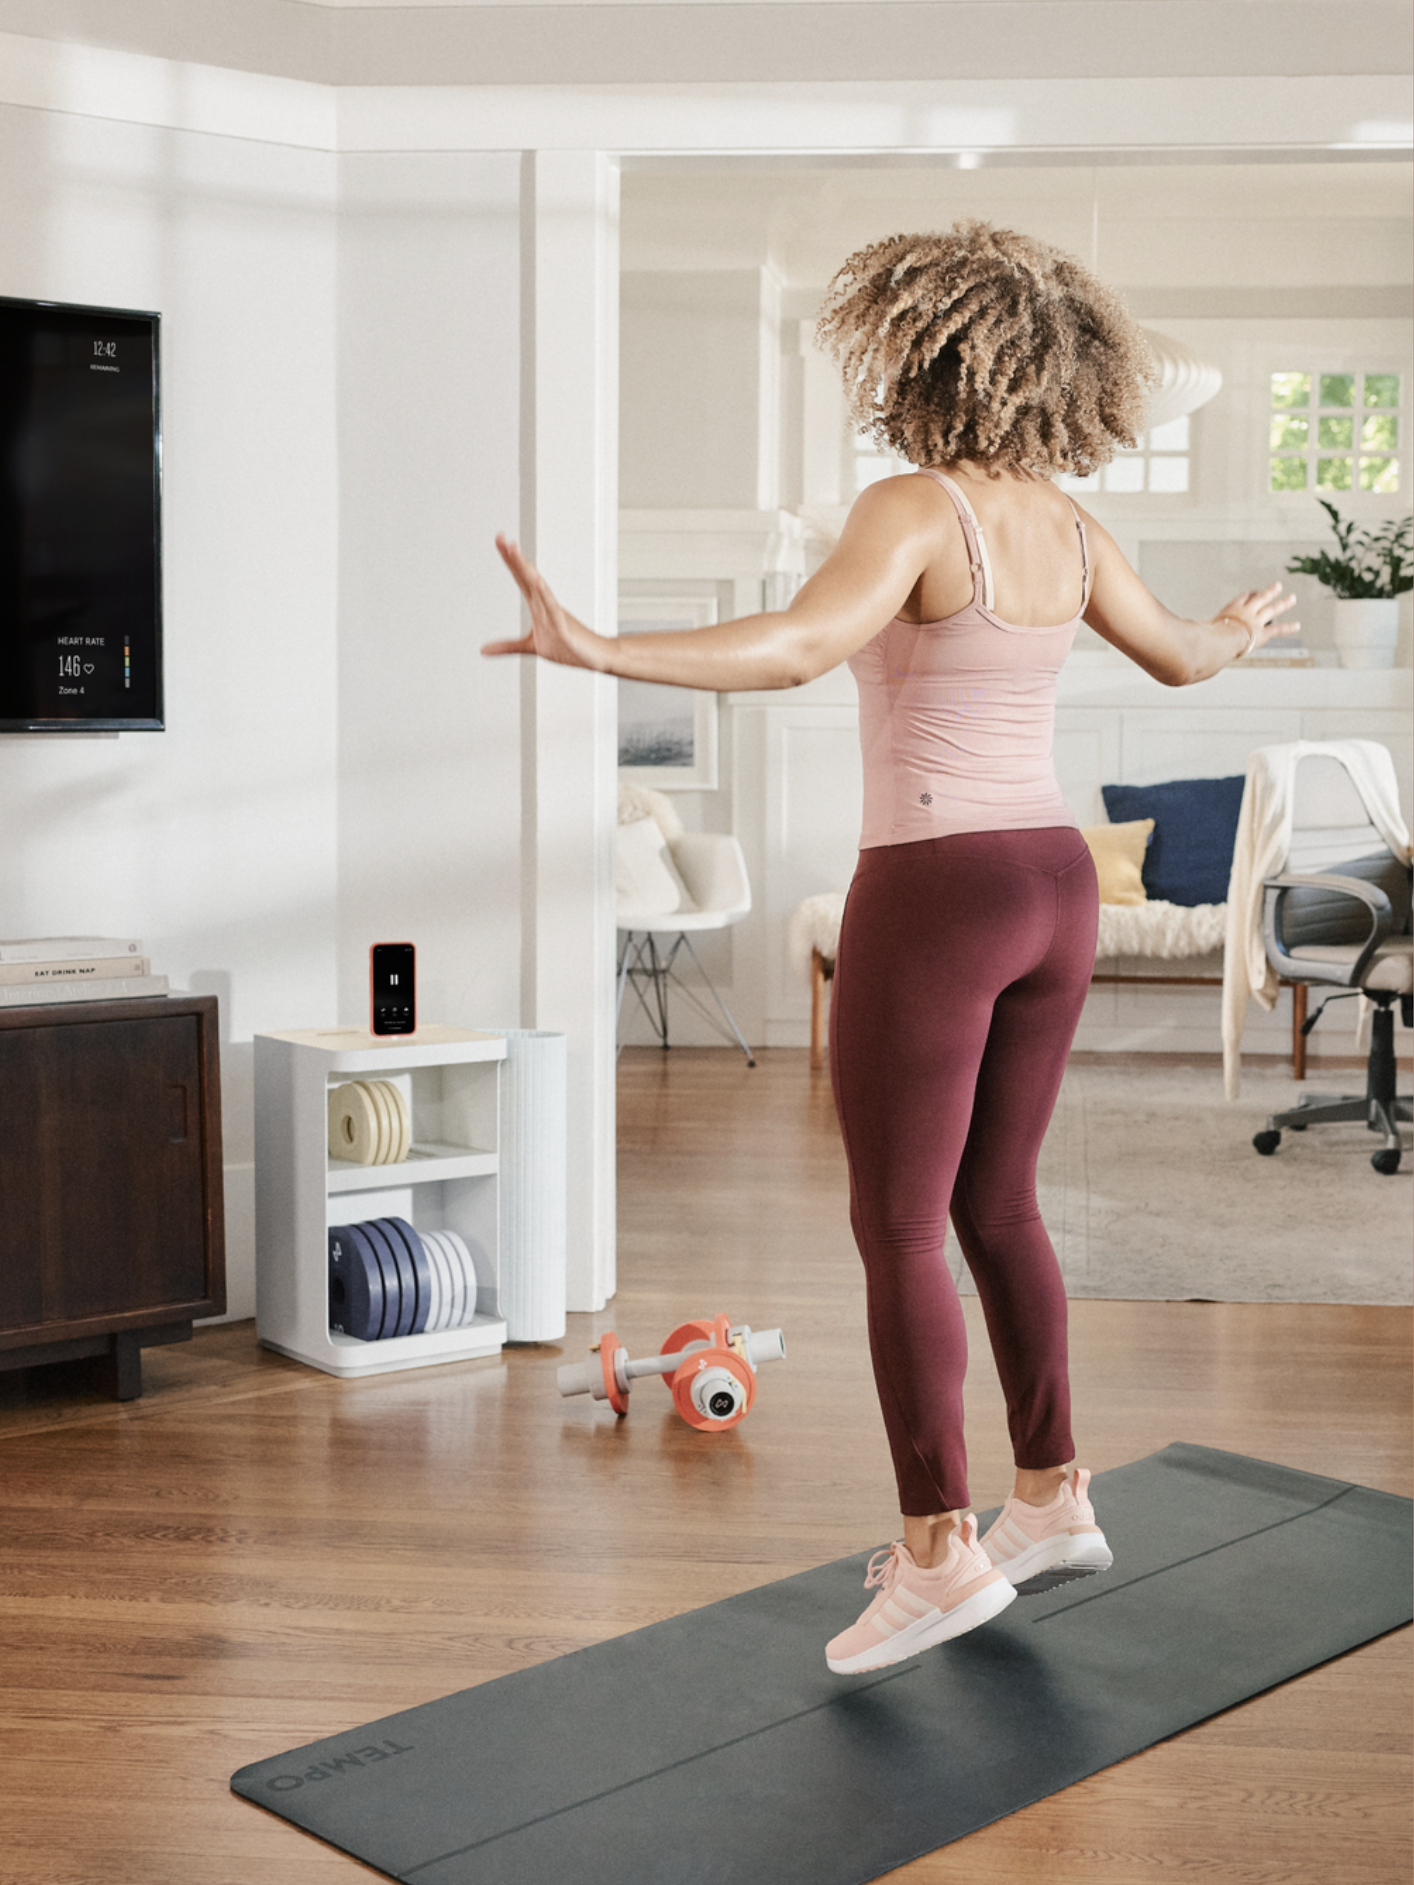 A woman exercising at home while following a workout routine on a television screen.